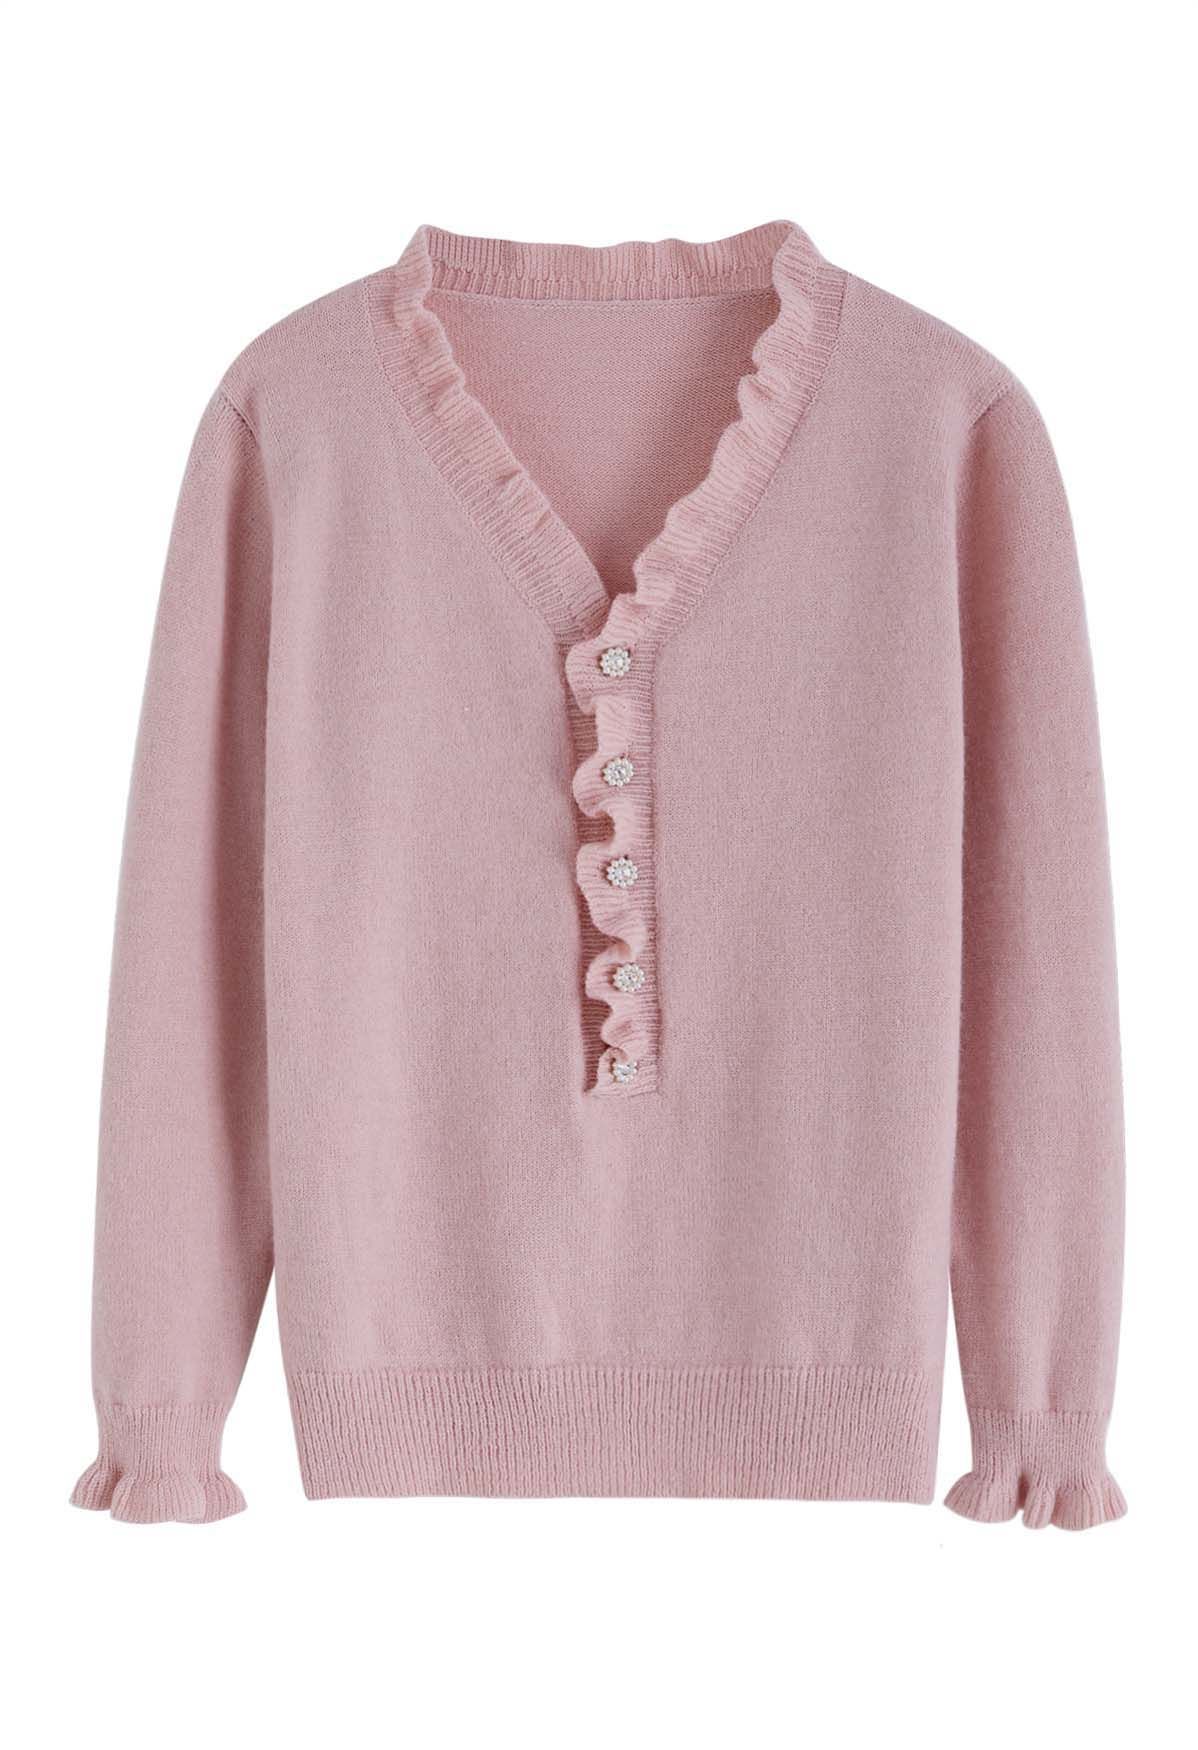 Ruffle Edge Button Front Knit Sweater in Pink - Retro, Indie and